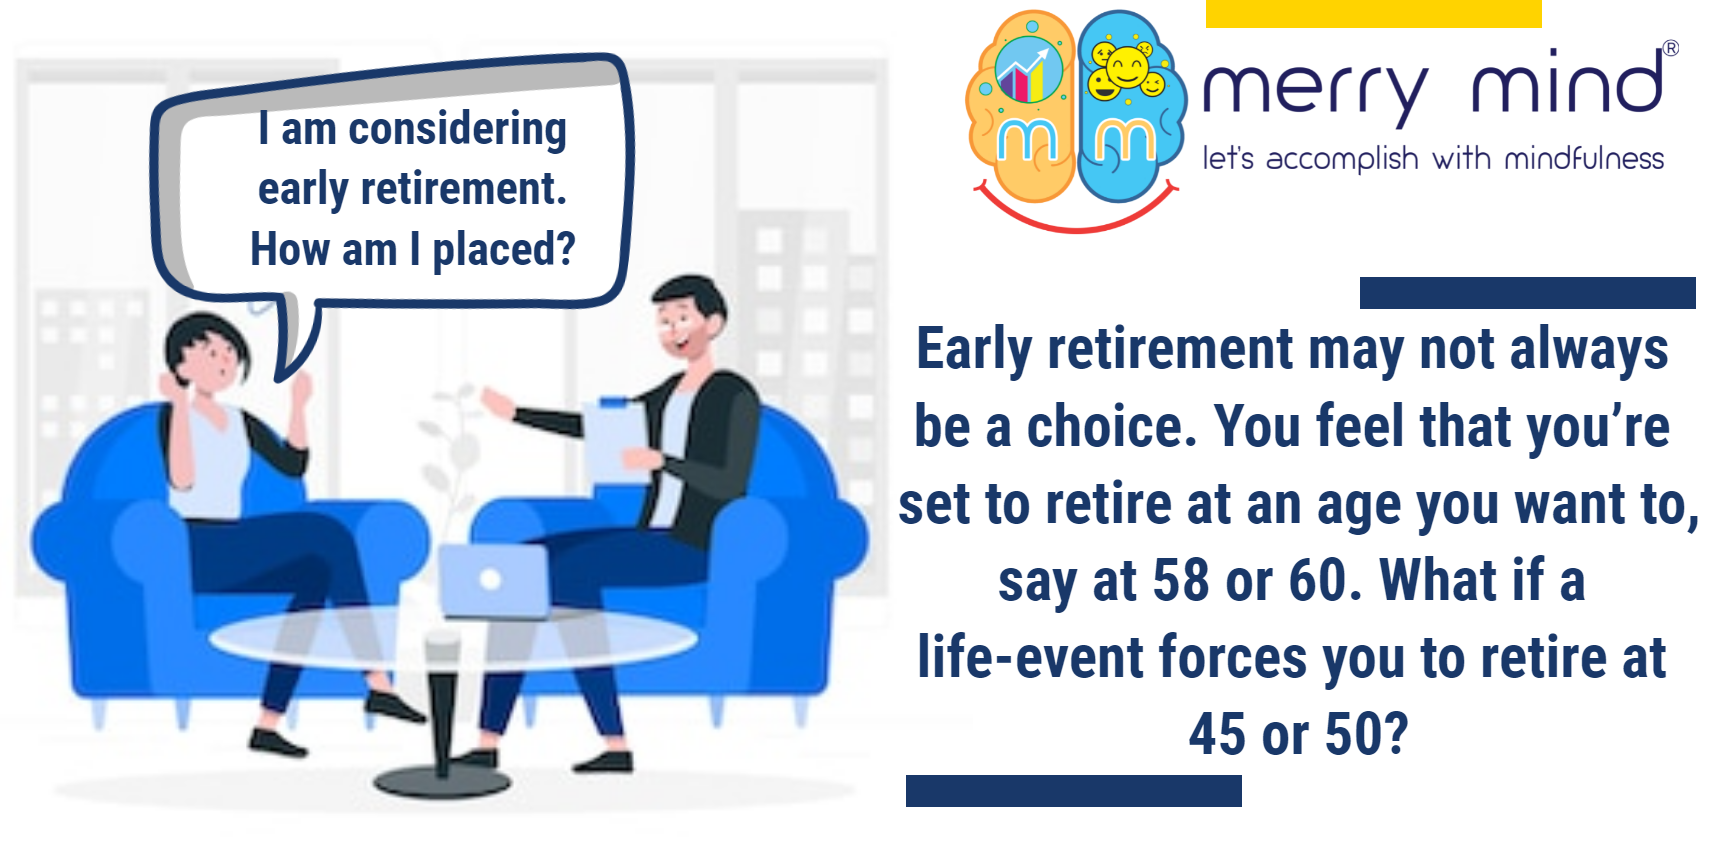 You need to prepare and plan for early retirement in case of any life-event